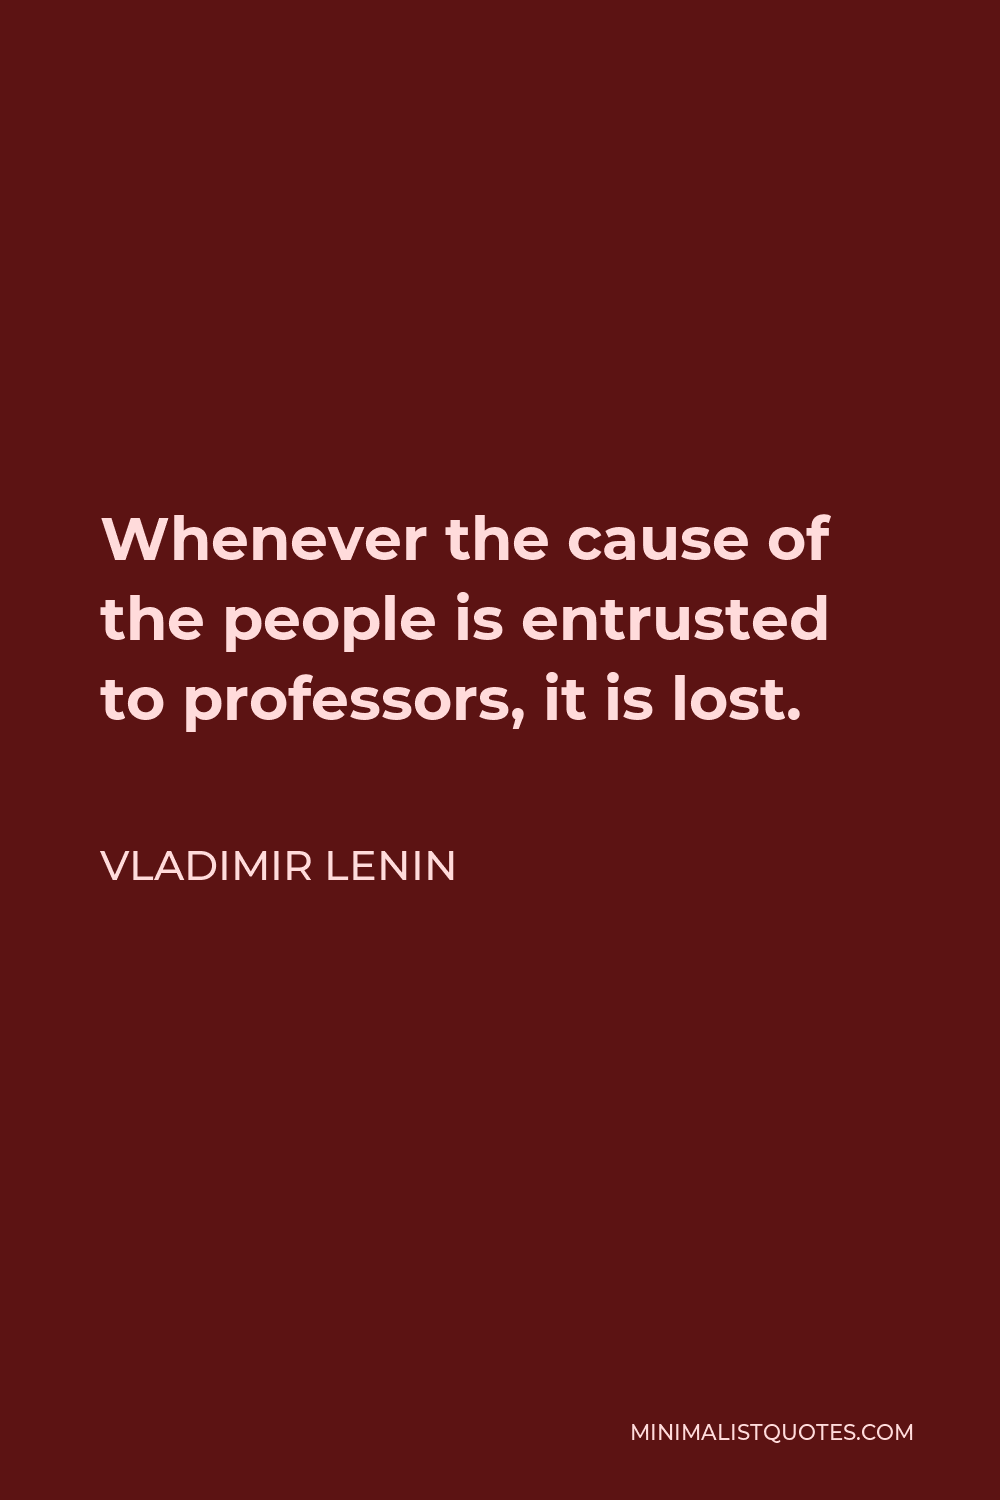 Vladimir Lenin Quote - Whenever the cause of the people is entrusted to professors, it is lost.